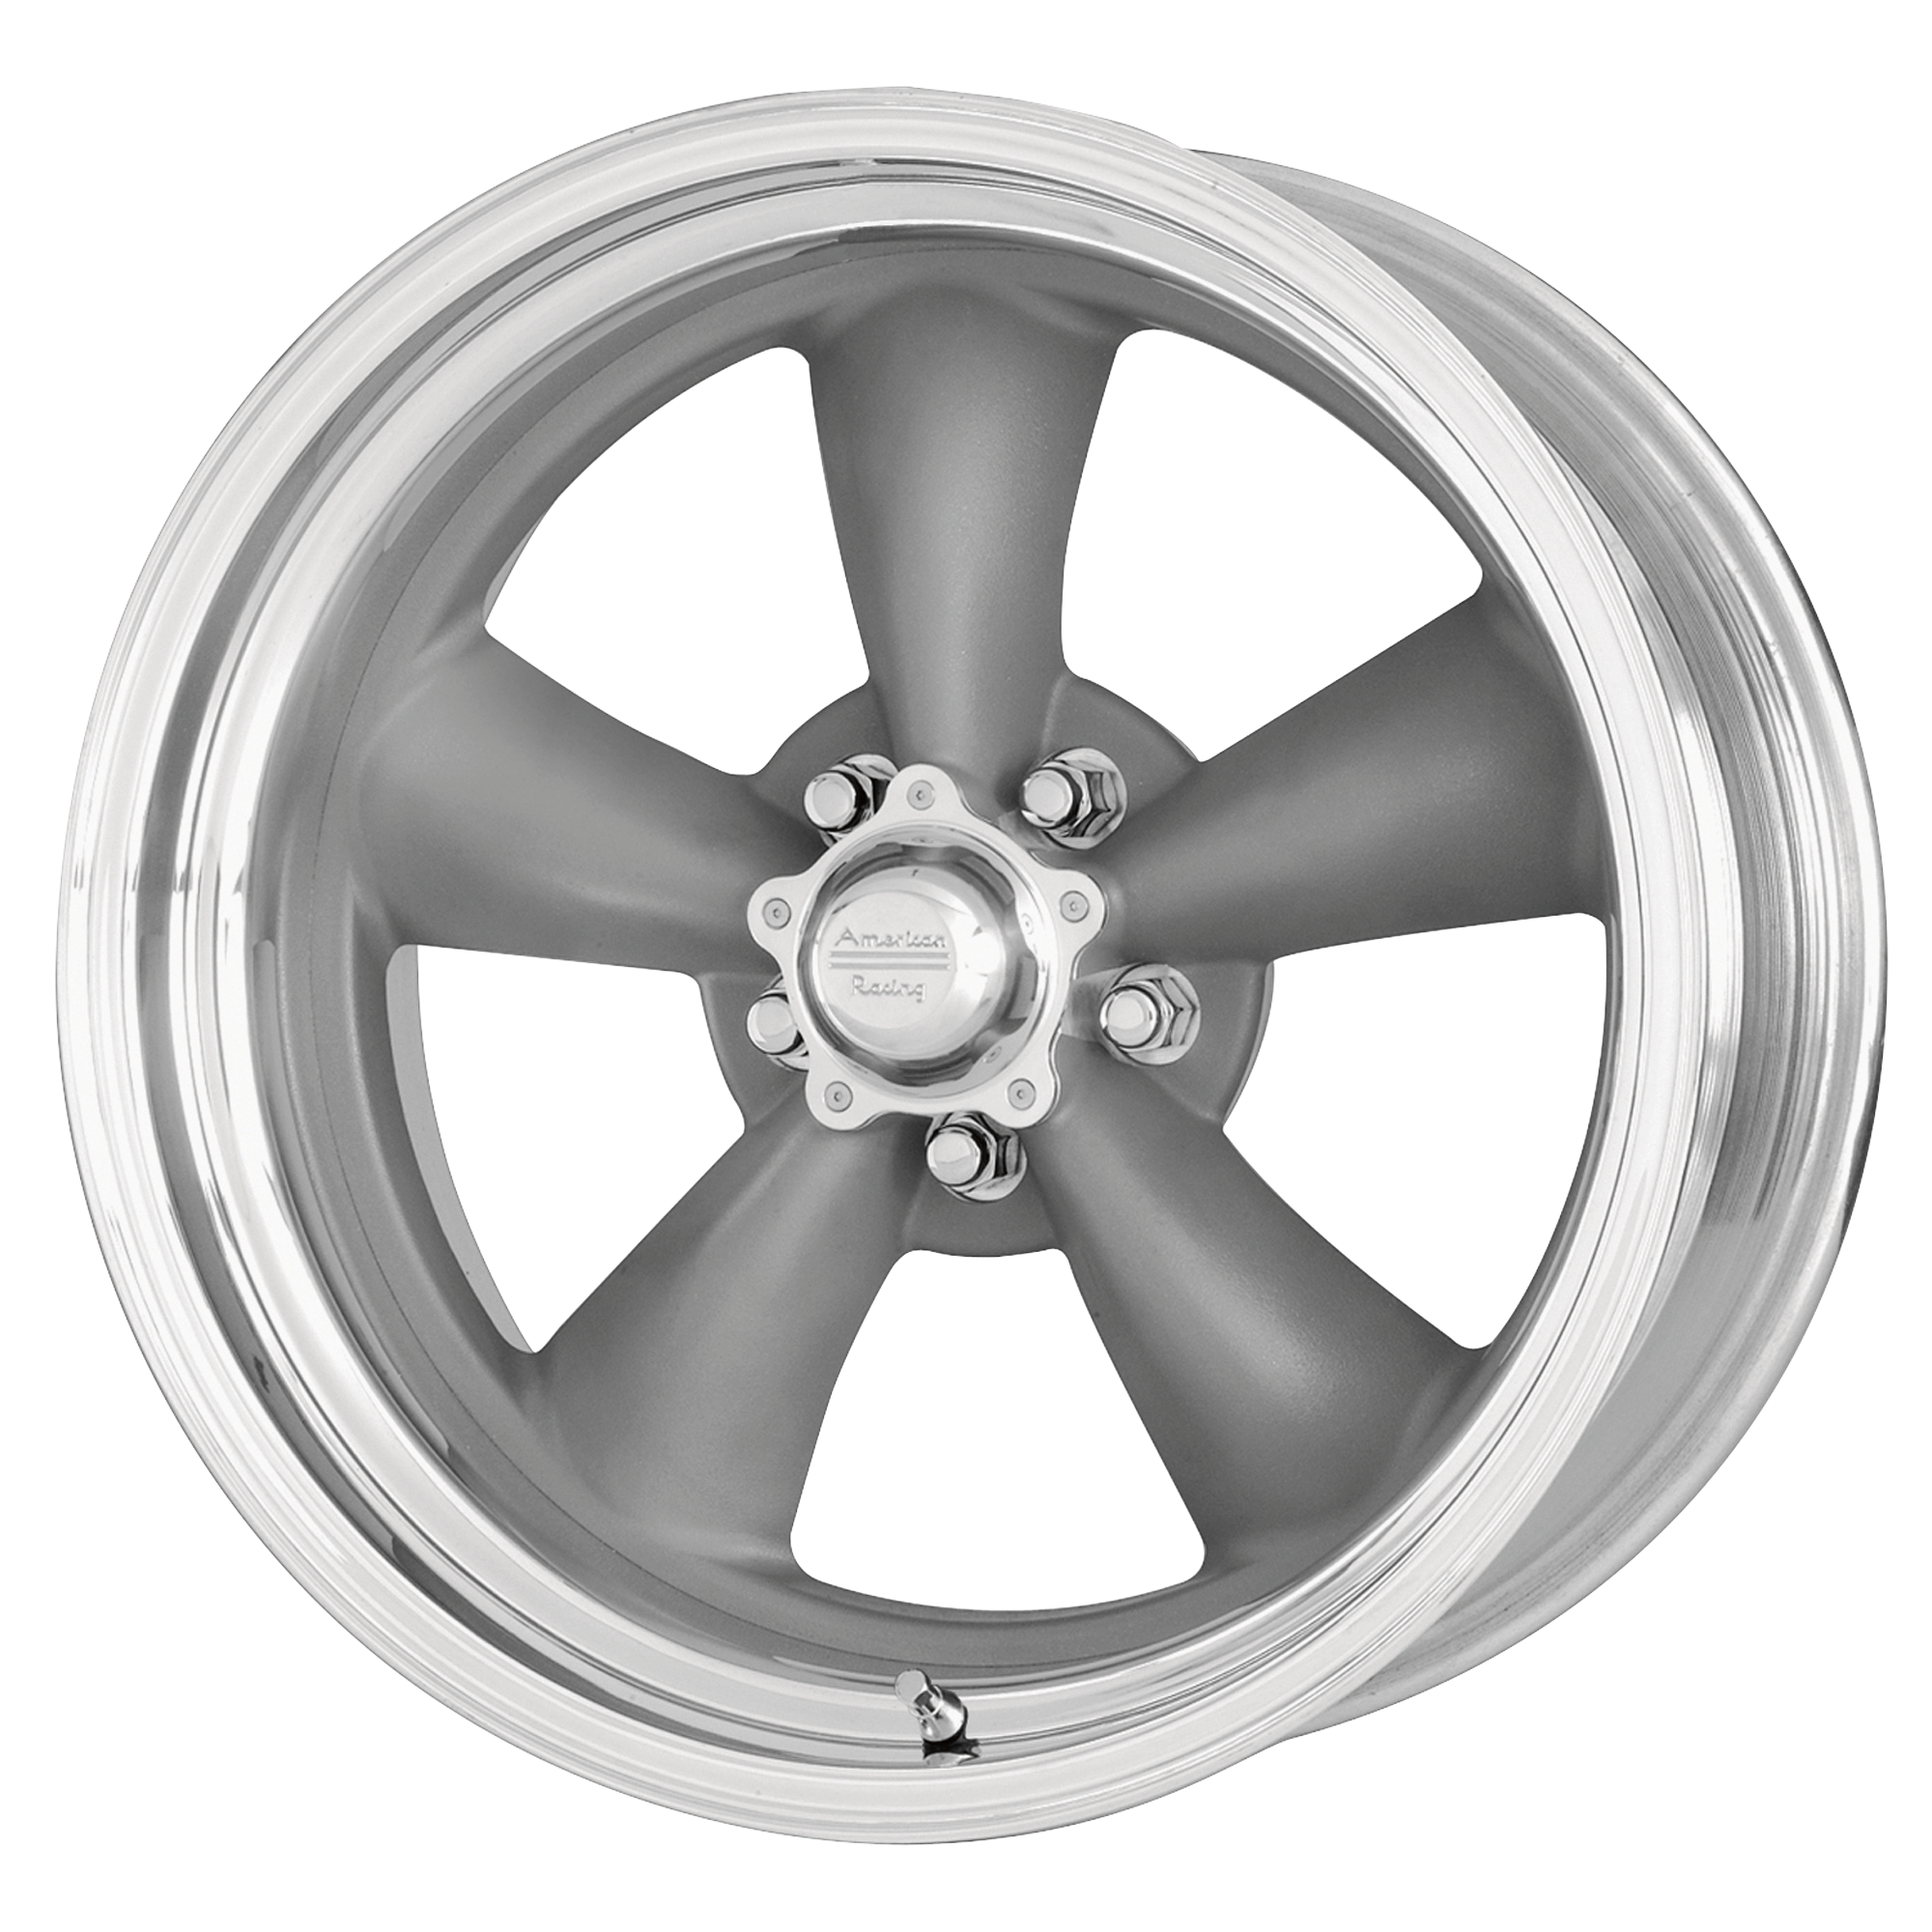 CLASSIC TORQ THRUST II ONE PIECE 18x9 5x120.65 MAG GRAY W/ MACHINED LIP (0 mm) - Tires and Engine Performance